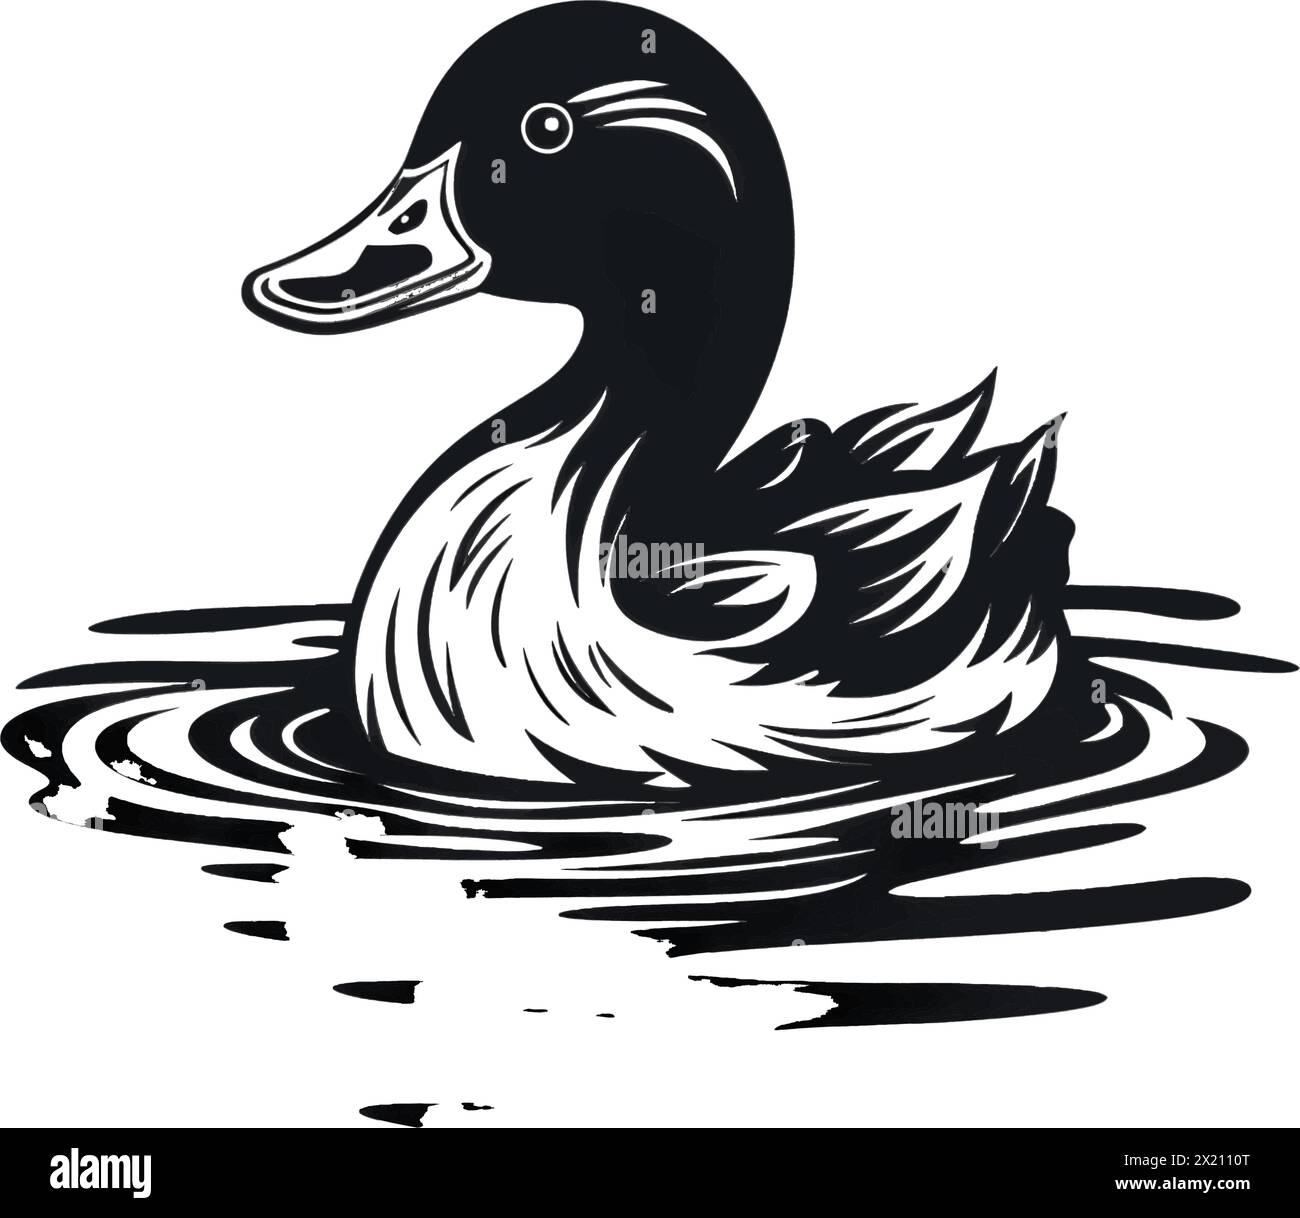 Vector illustration of a ducks in the water in black silhouette against a clean white background, capturing graceful forms of this vector. Stock Vector